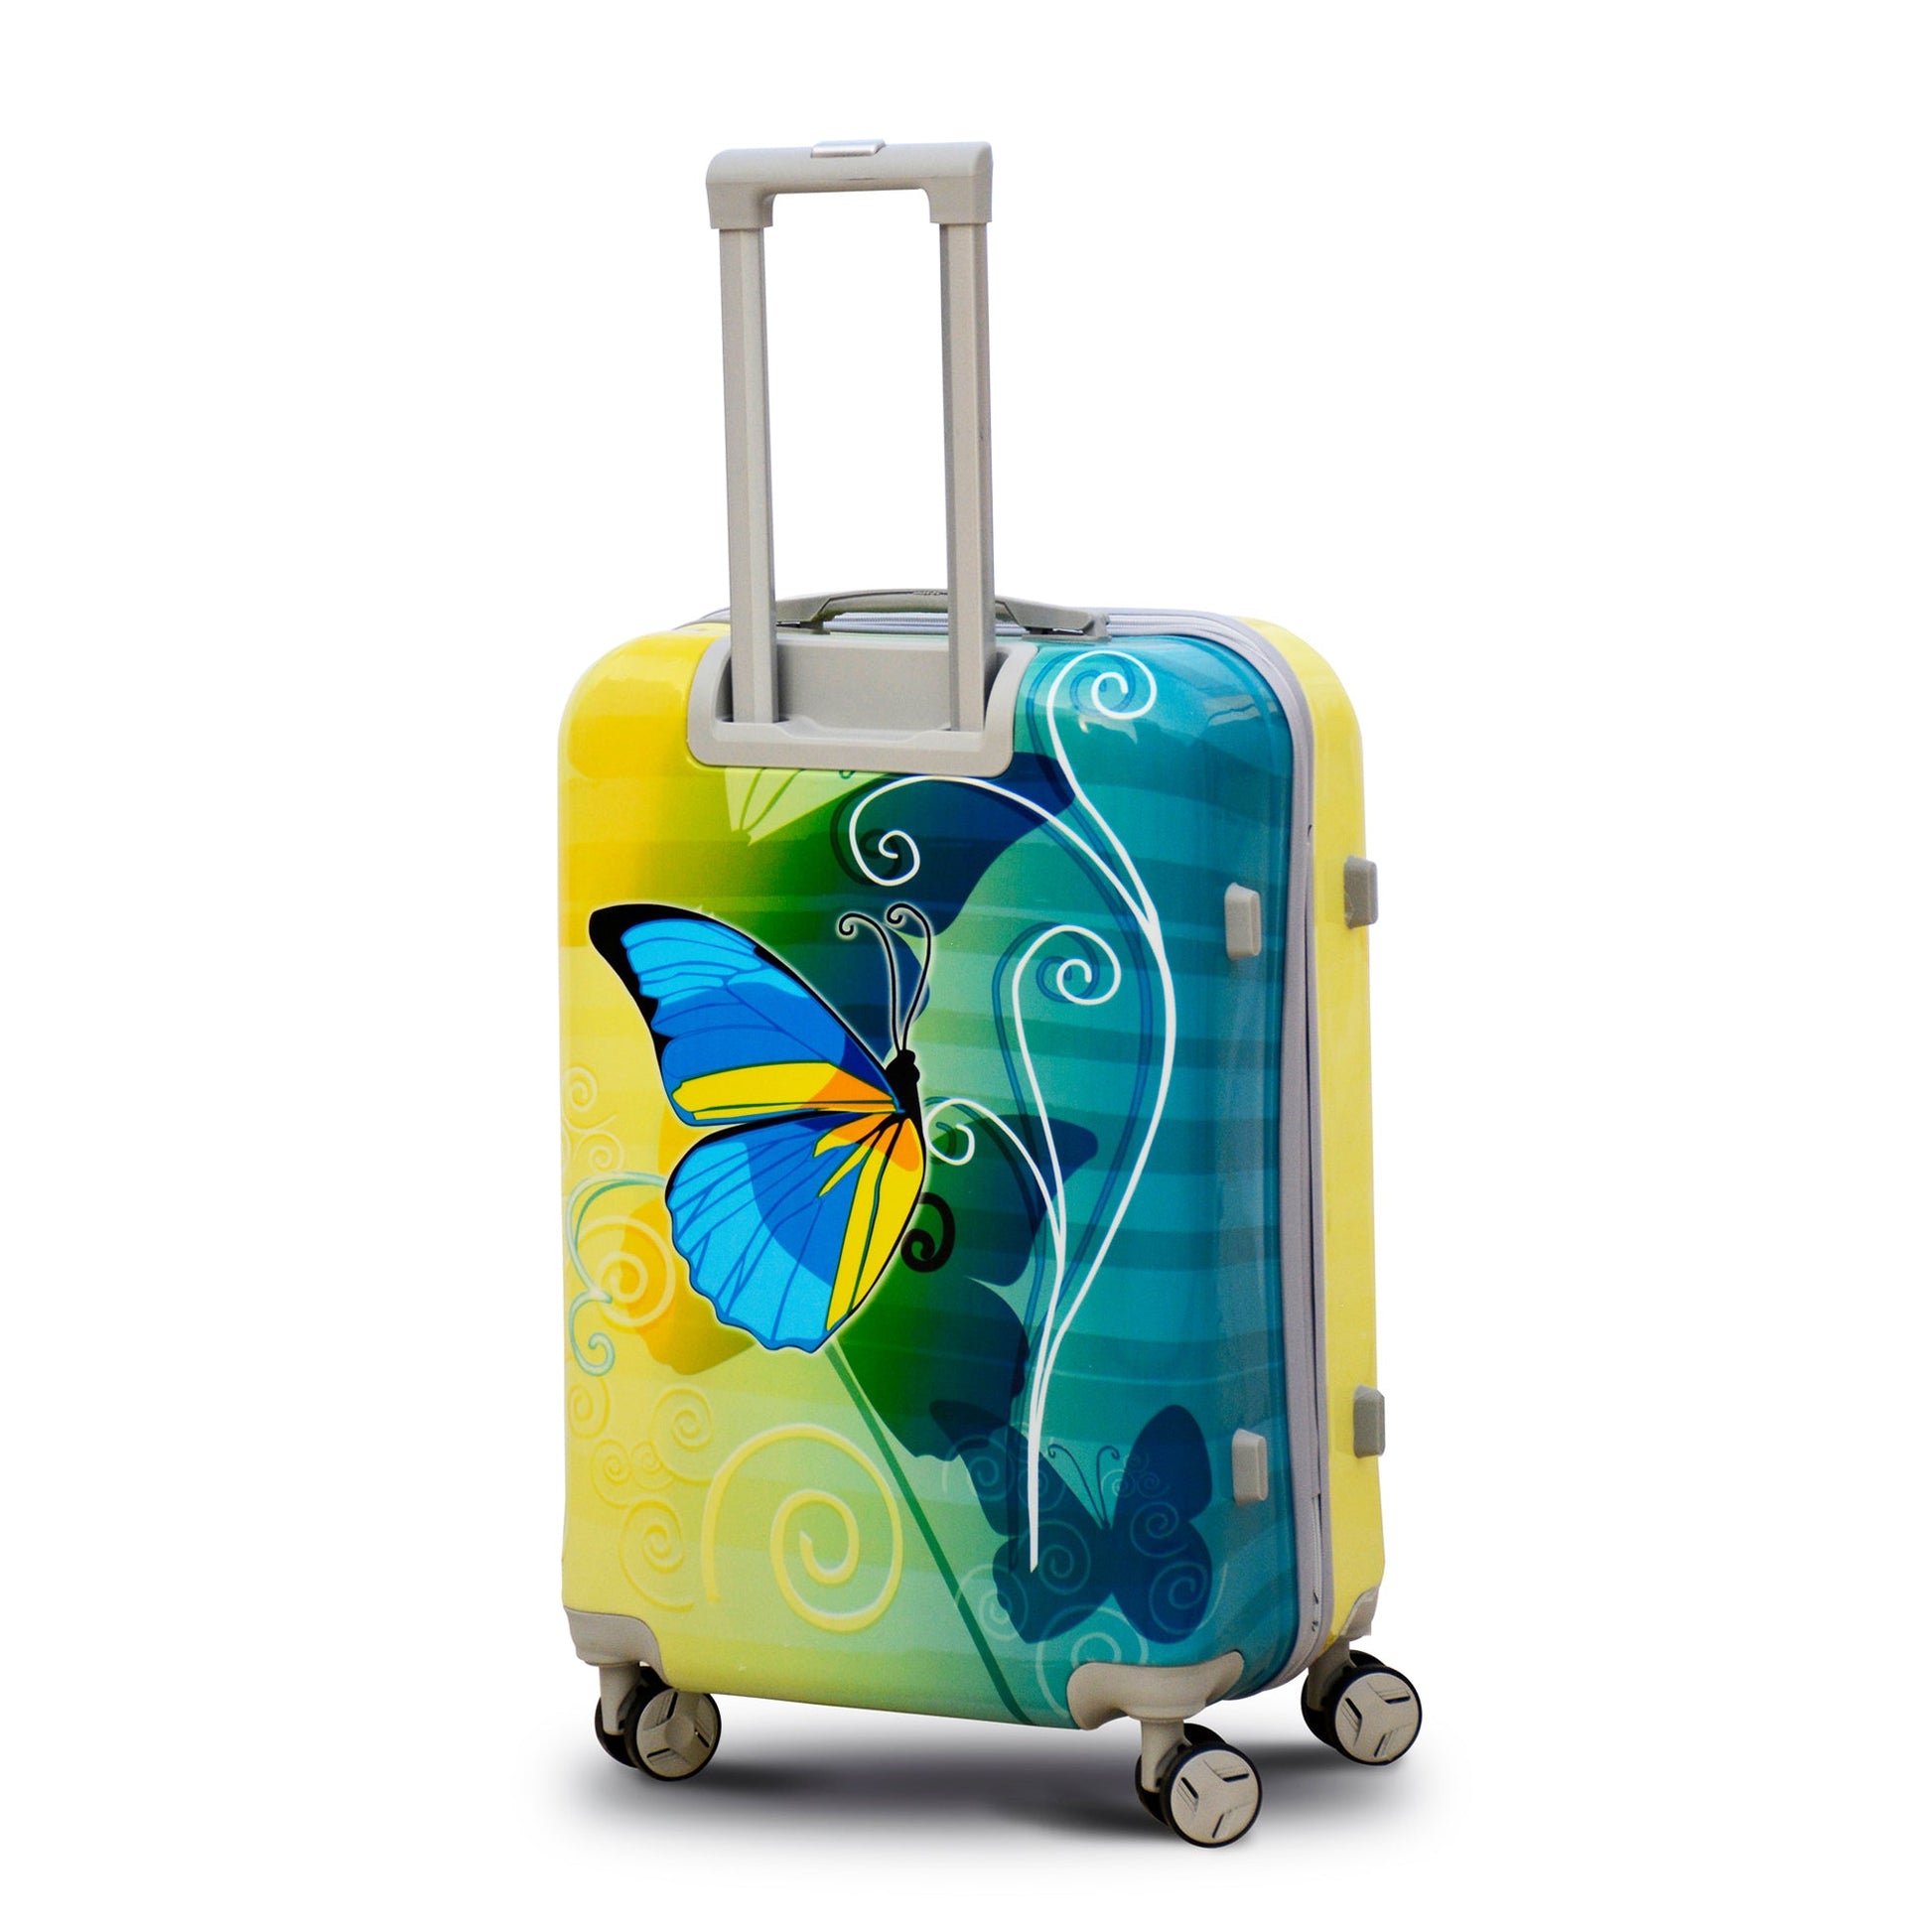 Green Colour Printed Butterfly Light Weight ABS Luggage | Hard Case Trolley Bag zaappy.com